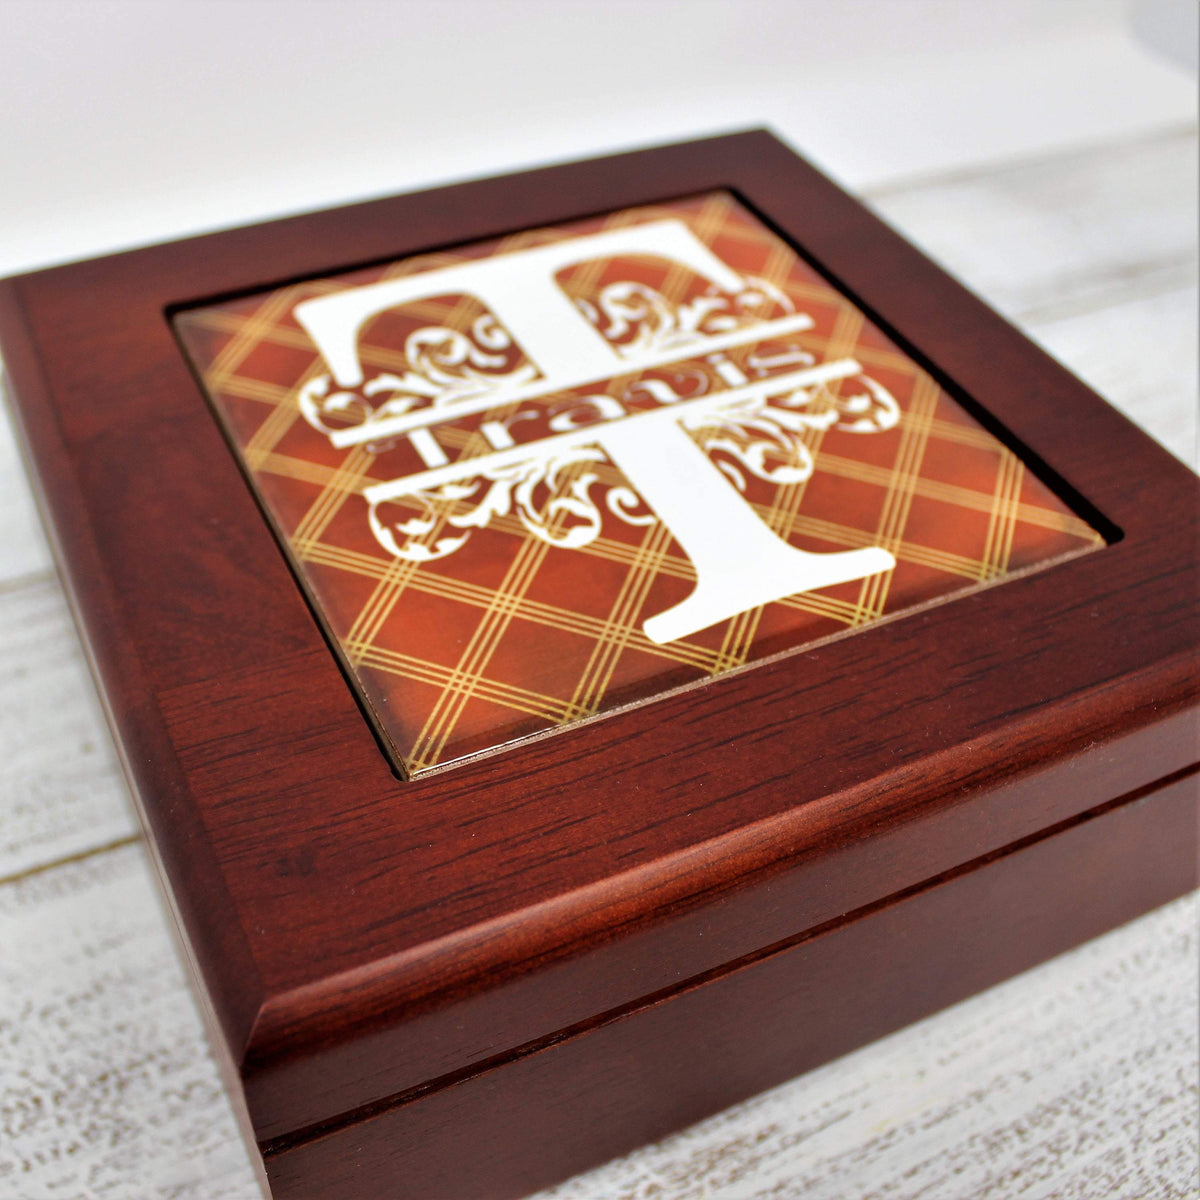 Personalized Mahogany Finished Box w/Hinge Lid | Brown Argyle - This &amp; That Solutions - Personalized Mahogany Finished Box w/Hinge Lid | Brown Argyle - Personalized Gifts &amp; Custom Home Decor